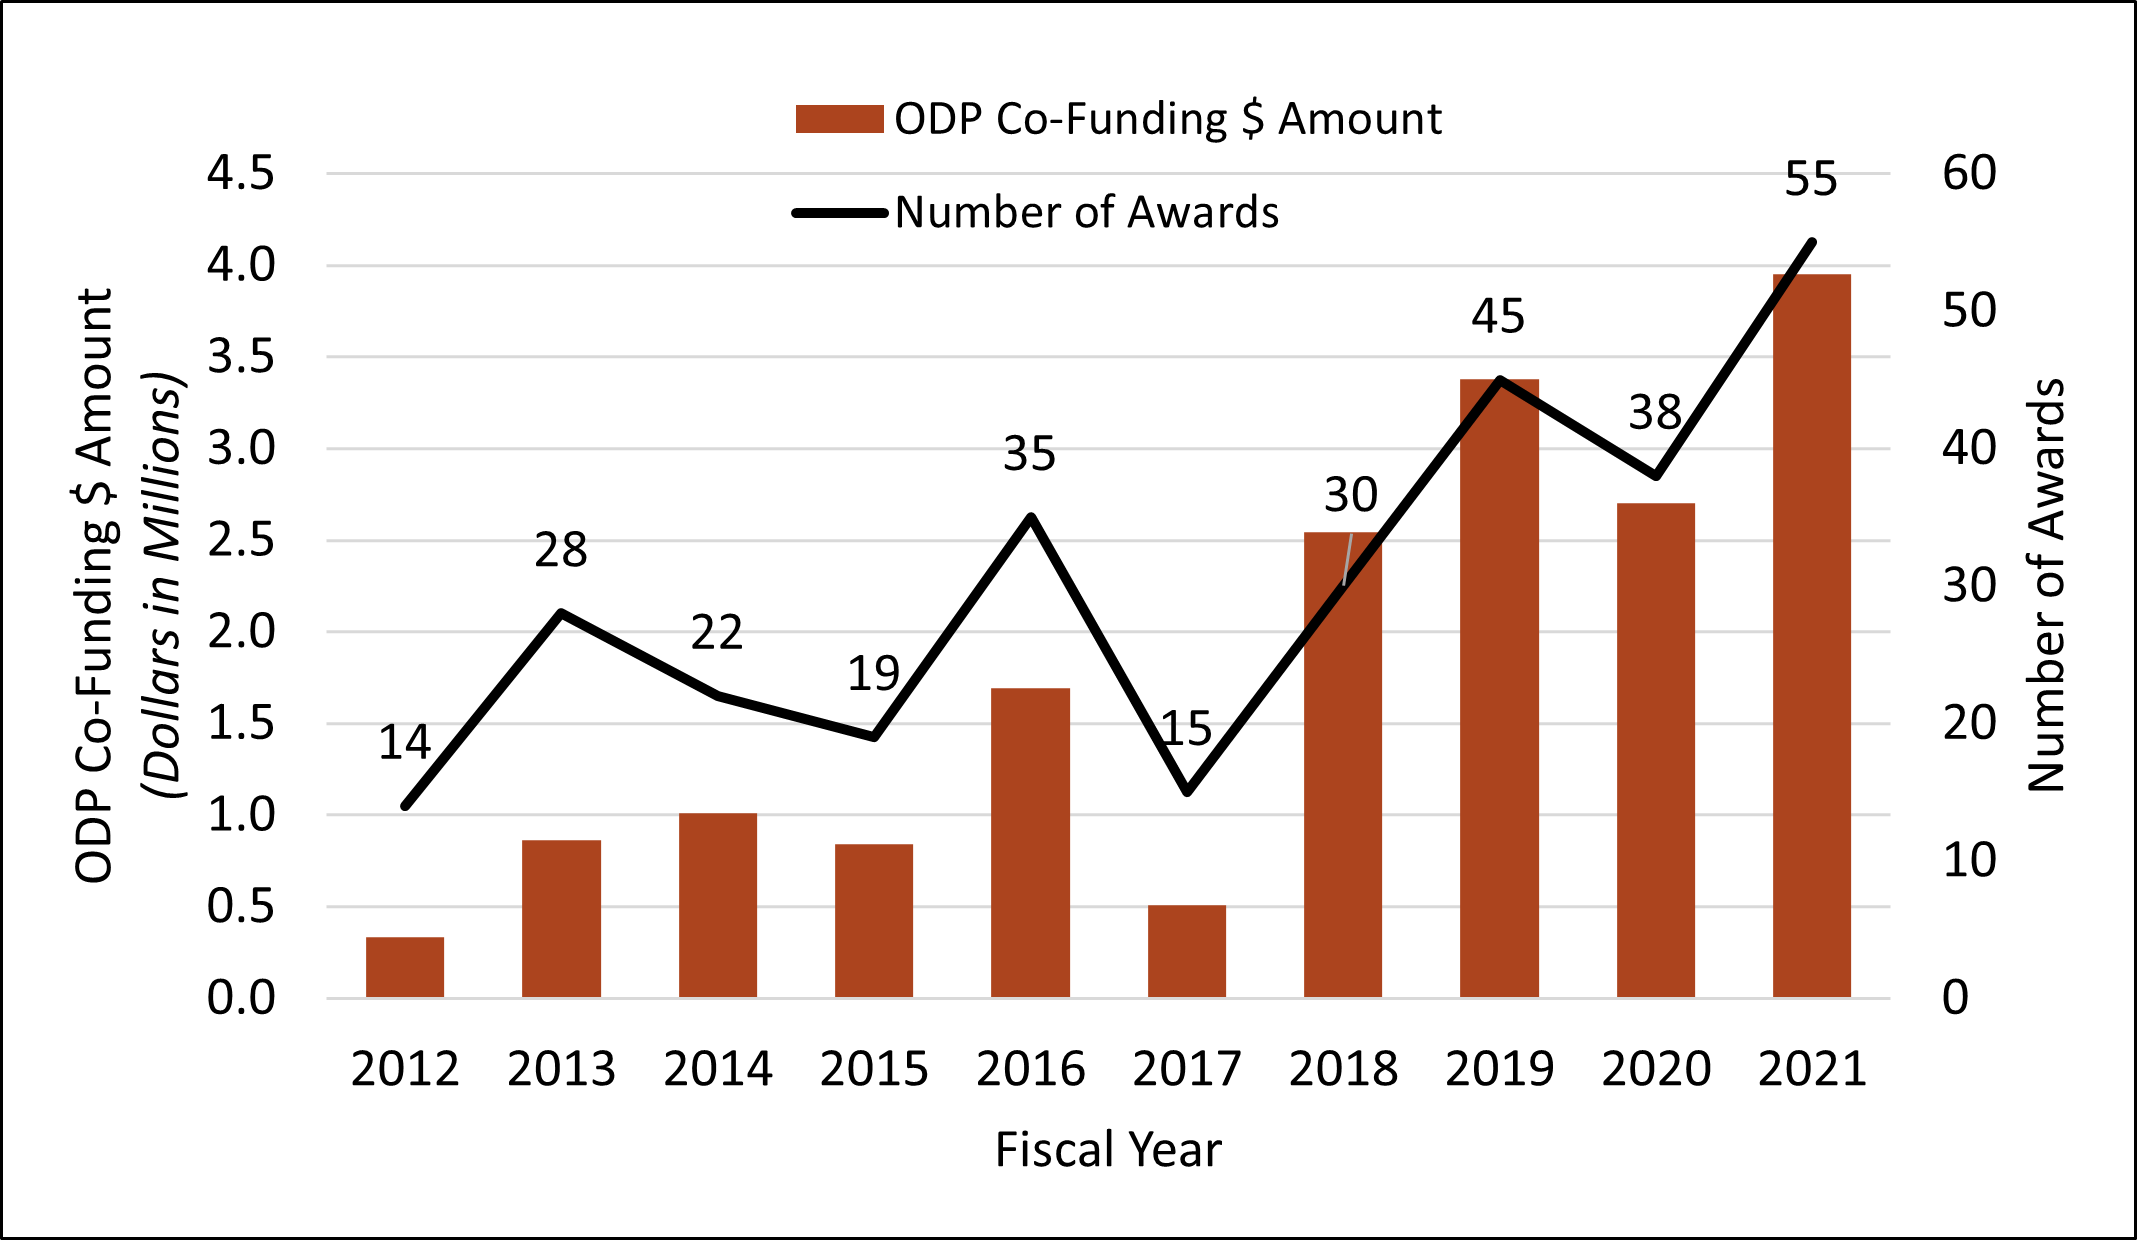 "Combined graph and chart. Line graph showing number of awards from 0 to 60. Bar chart with ODP Co-Funding amounts. Funding amounts are from 0.0 to 4.5 dollars in millions. For both the chart and graph, timeline spans the 2012 to 2021 fiscal years. The line indicates the number of awards is 14 in 2012, 28 in 2013, 22 in 2014, 19 in 2015, 35 in 2016, 15 in 2017, 30 in 2018, 45 in 2019, 38 in 2020, and 55 in 2021. The bars follow a similar trend with an overall increase from 2012 to 2021."